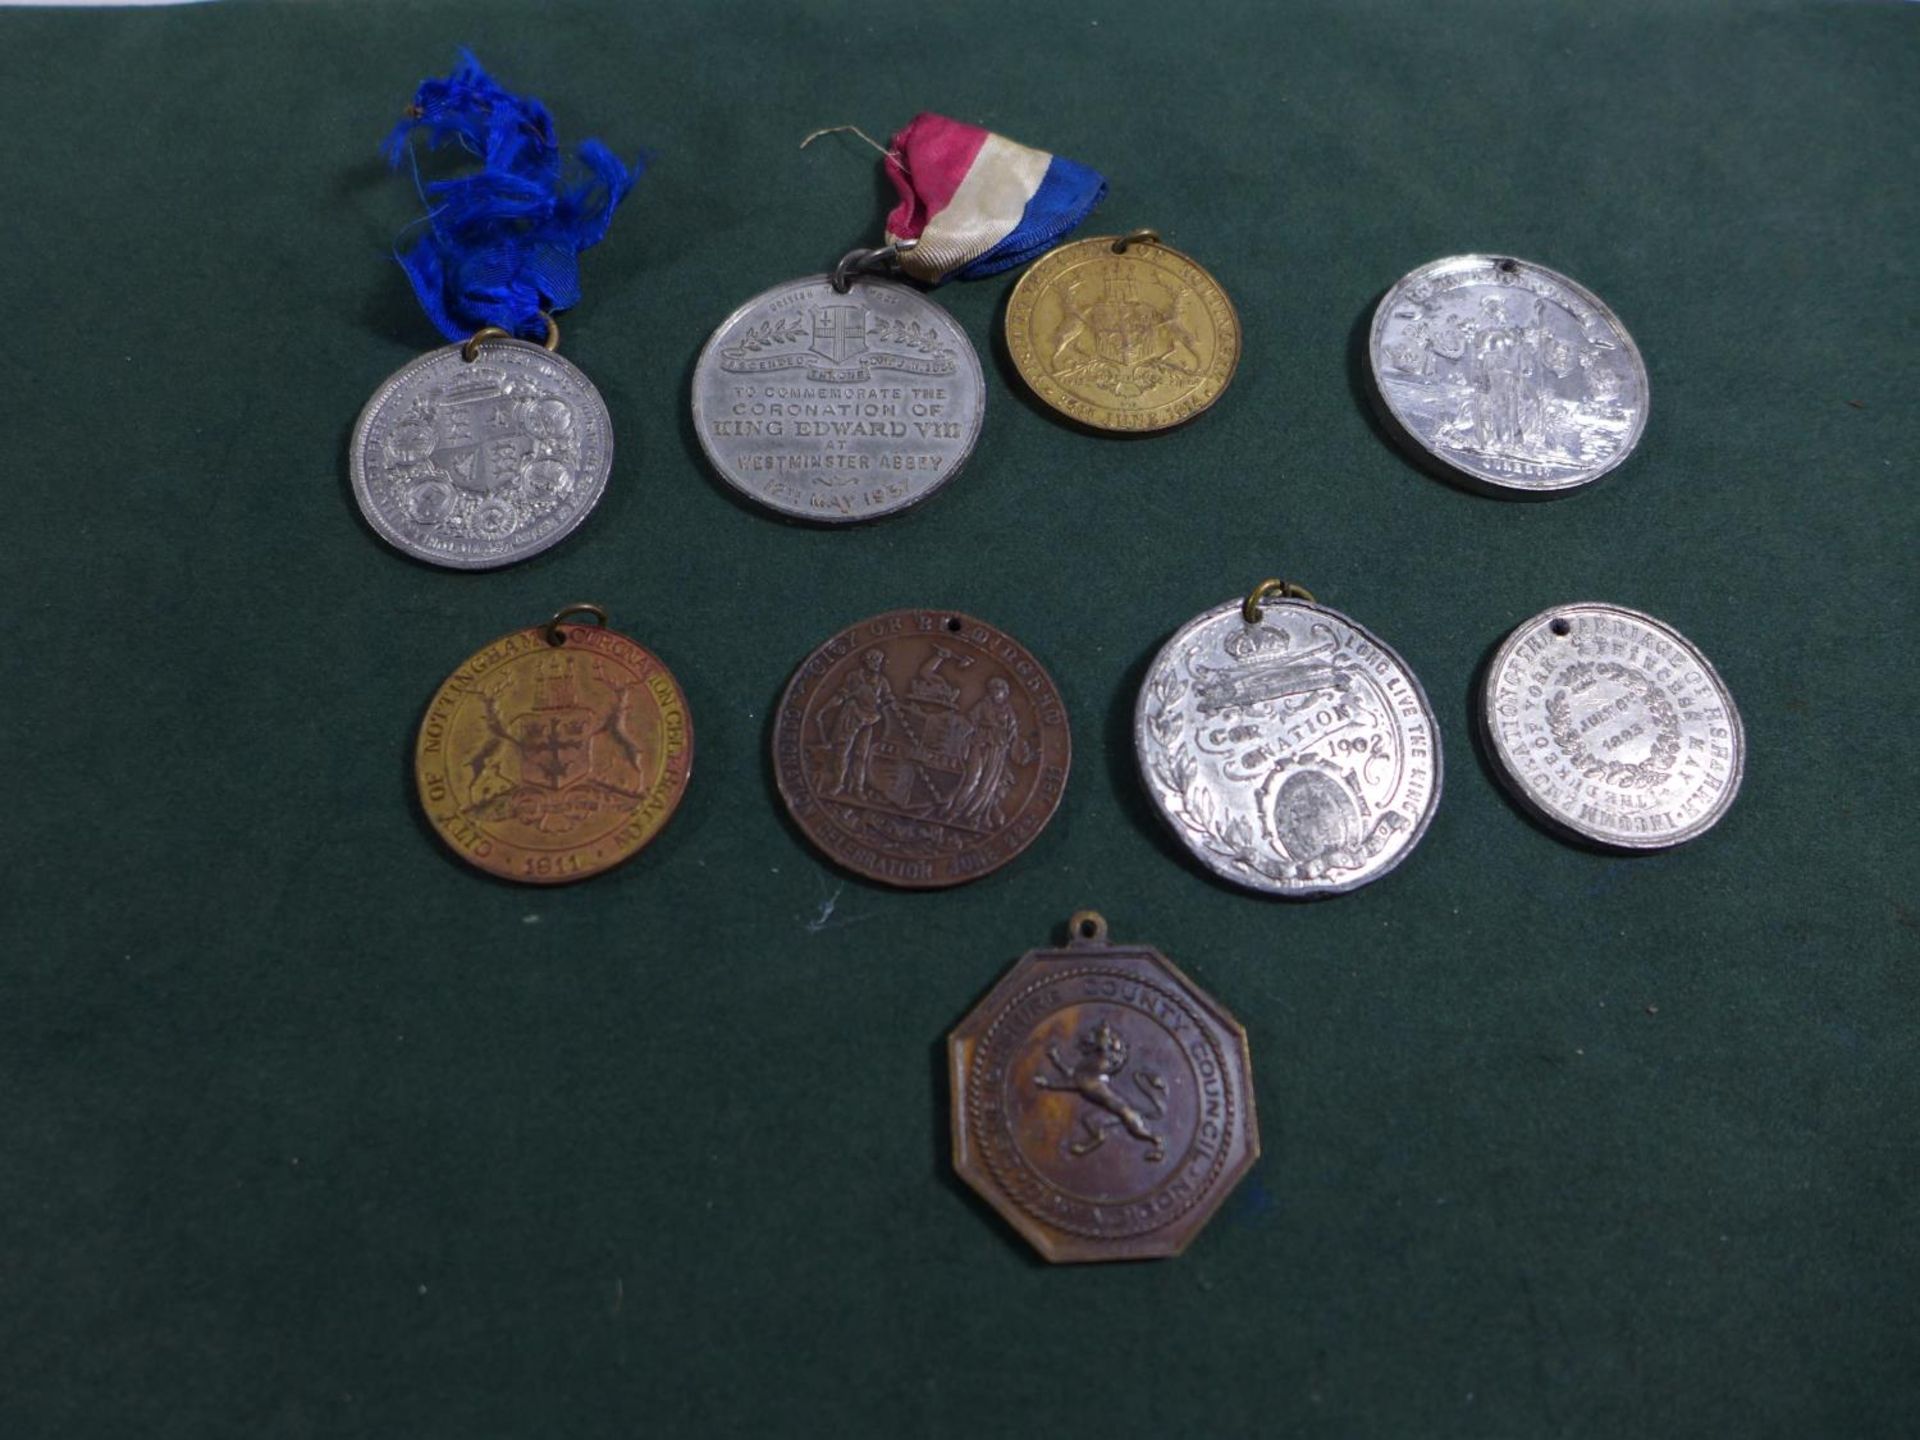 A COLLECTION OF NINE ROYAL FAMILY CORONATION AND JUBILEE MEDALS FROM THE REIGN OF QUEEN VICTORIA - Image 2 of 2